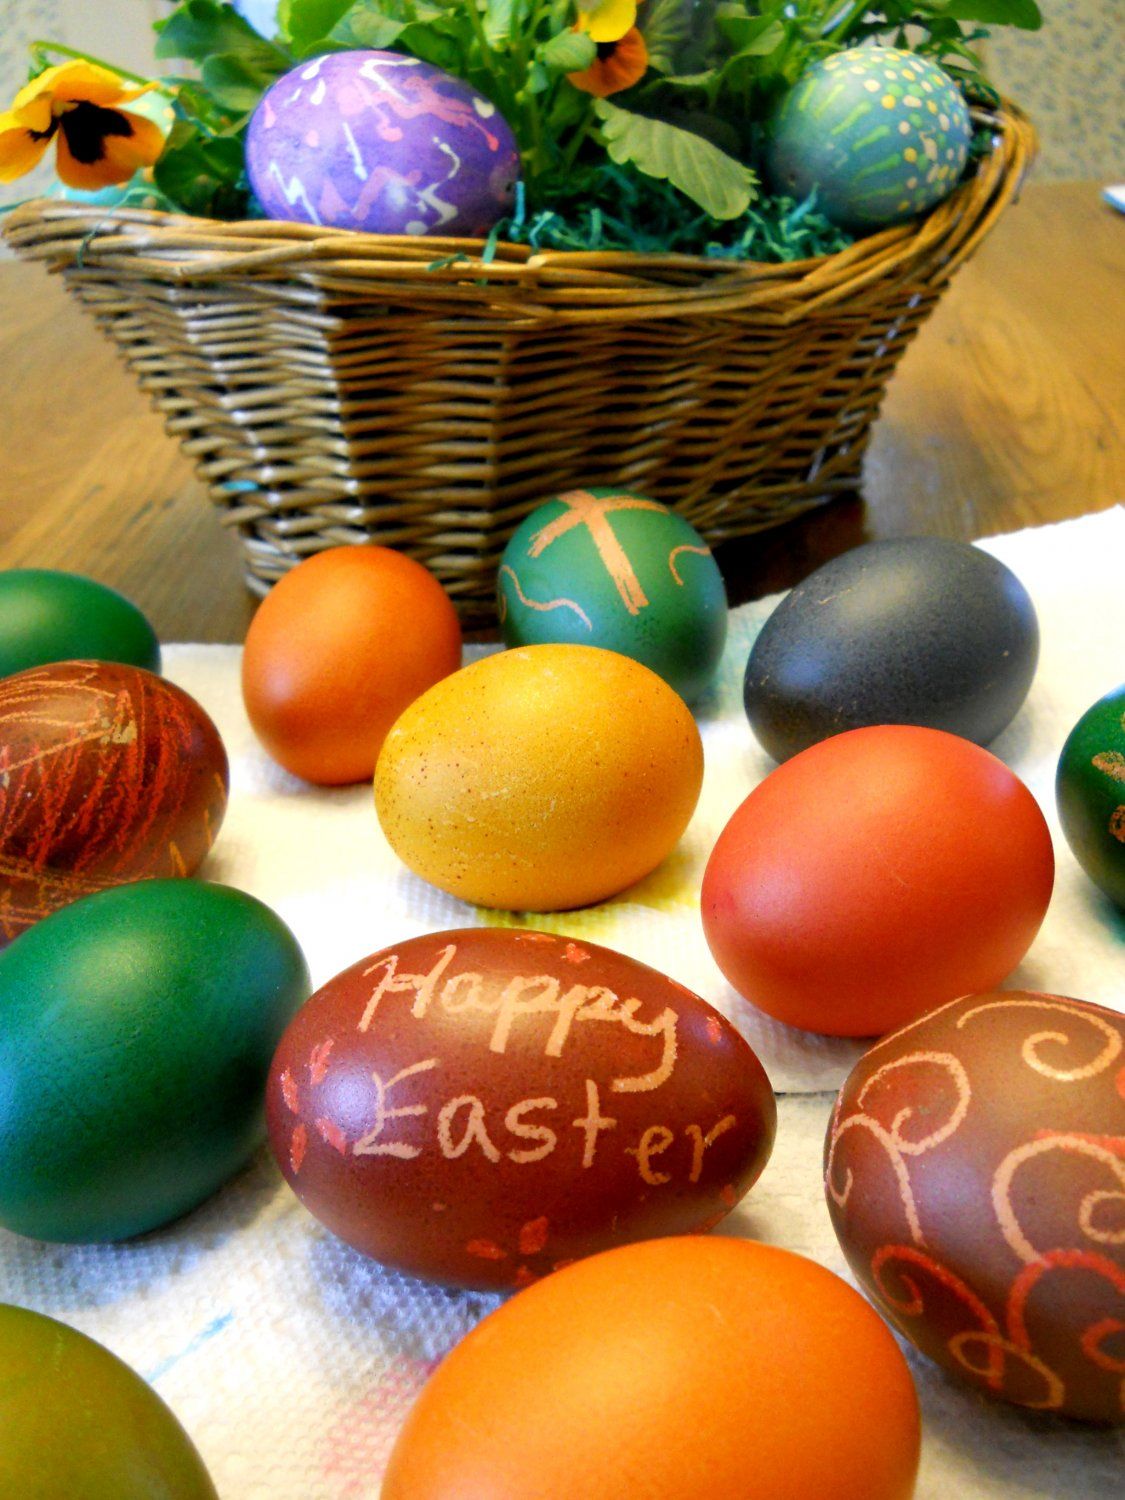 Next Happening: Spring, Easter, and Eggs